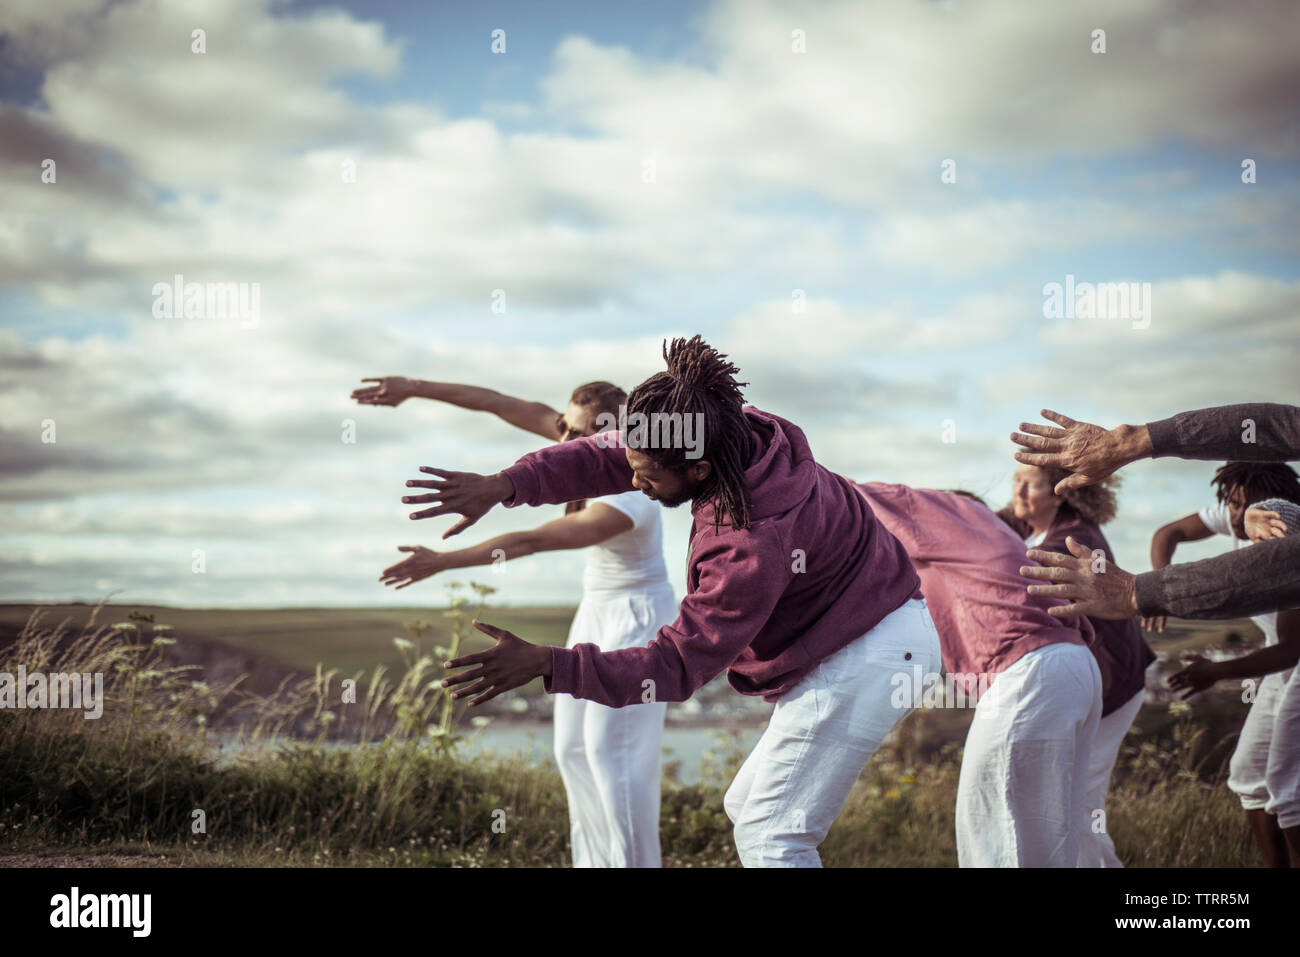 People practicing relaxation exercise on field against cloudy sky Stock Photo